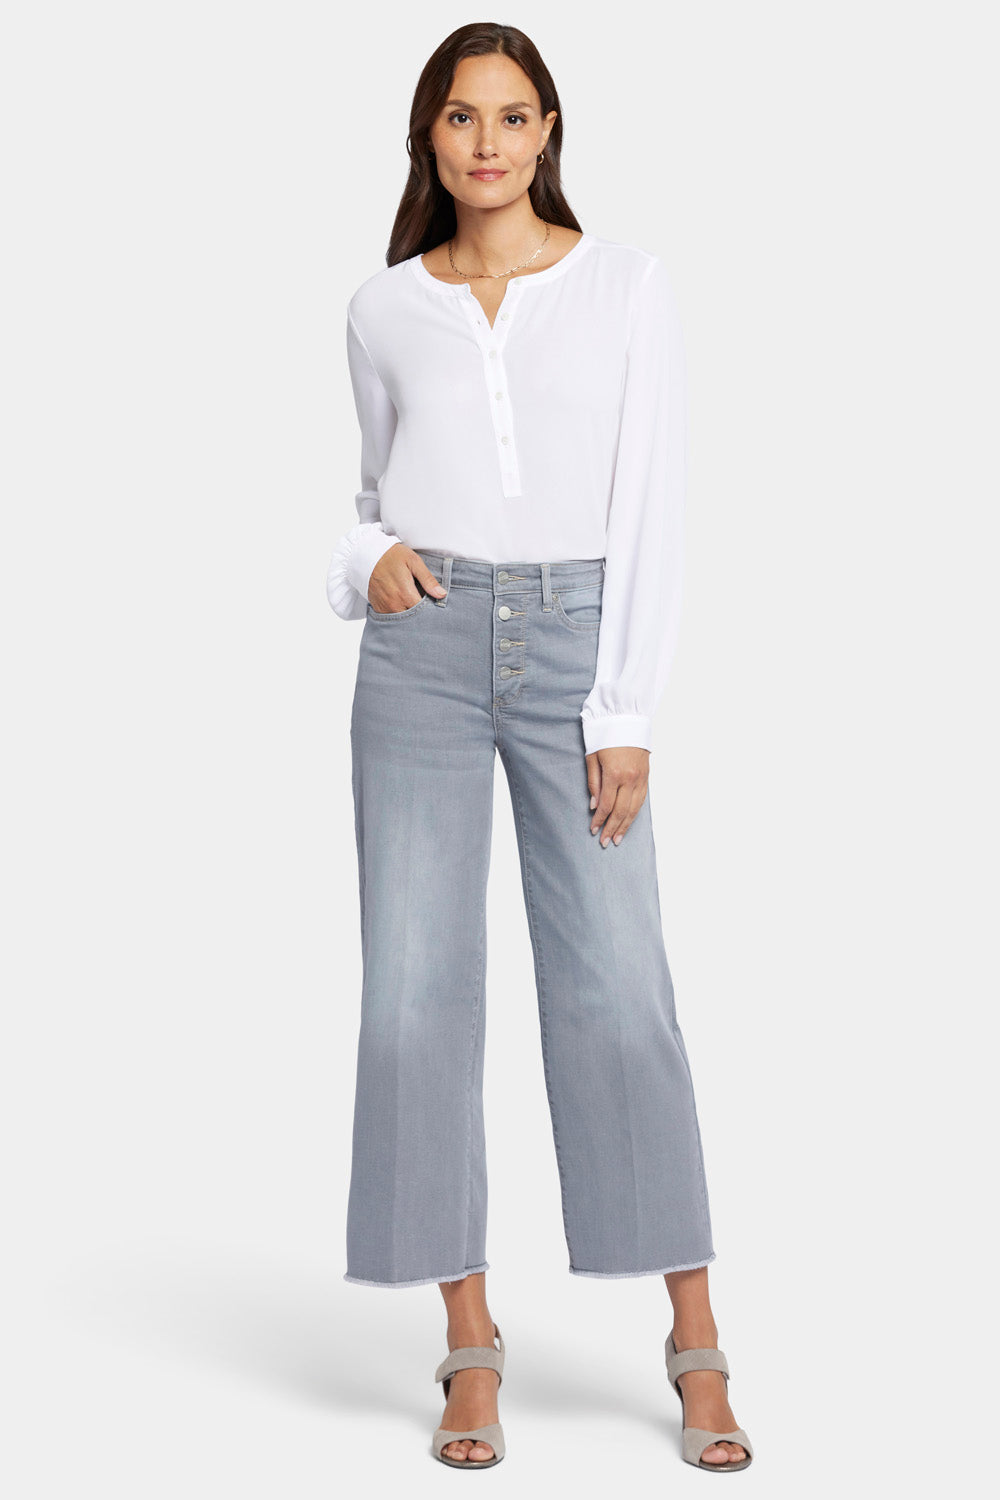 NYDJ Teresa Wide Leg Ankle Jeans With High Rise And Frayed Hems - Rock Sand